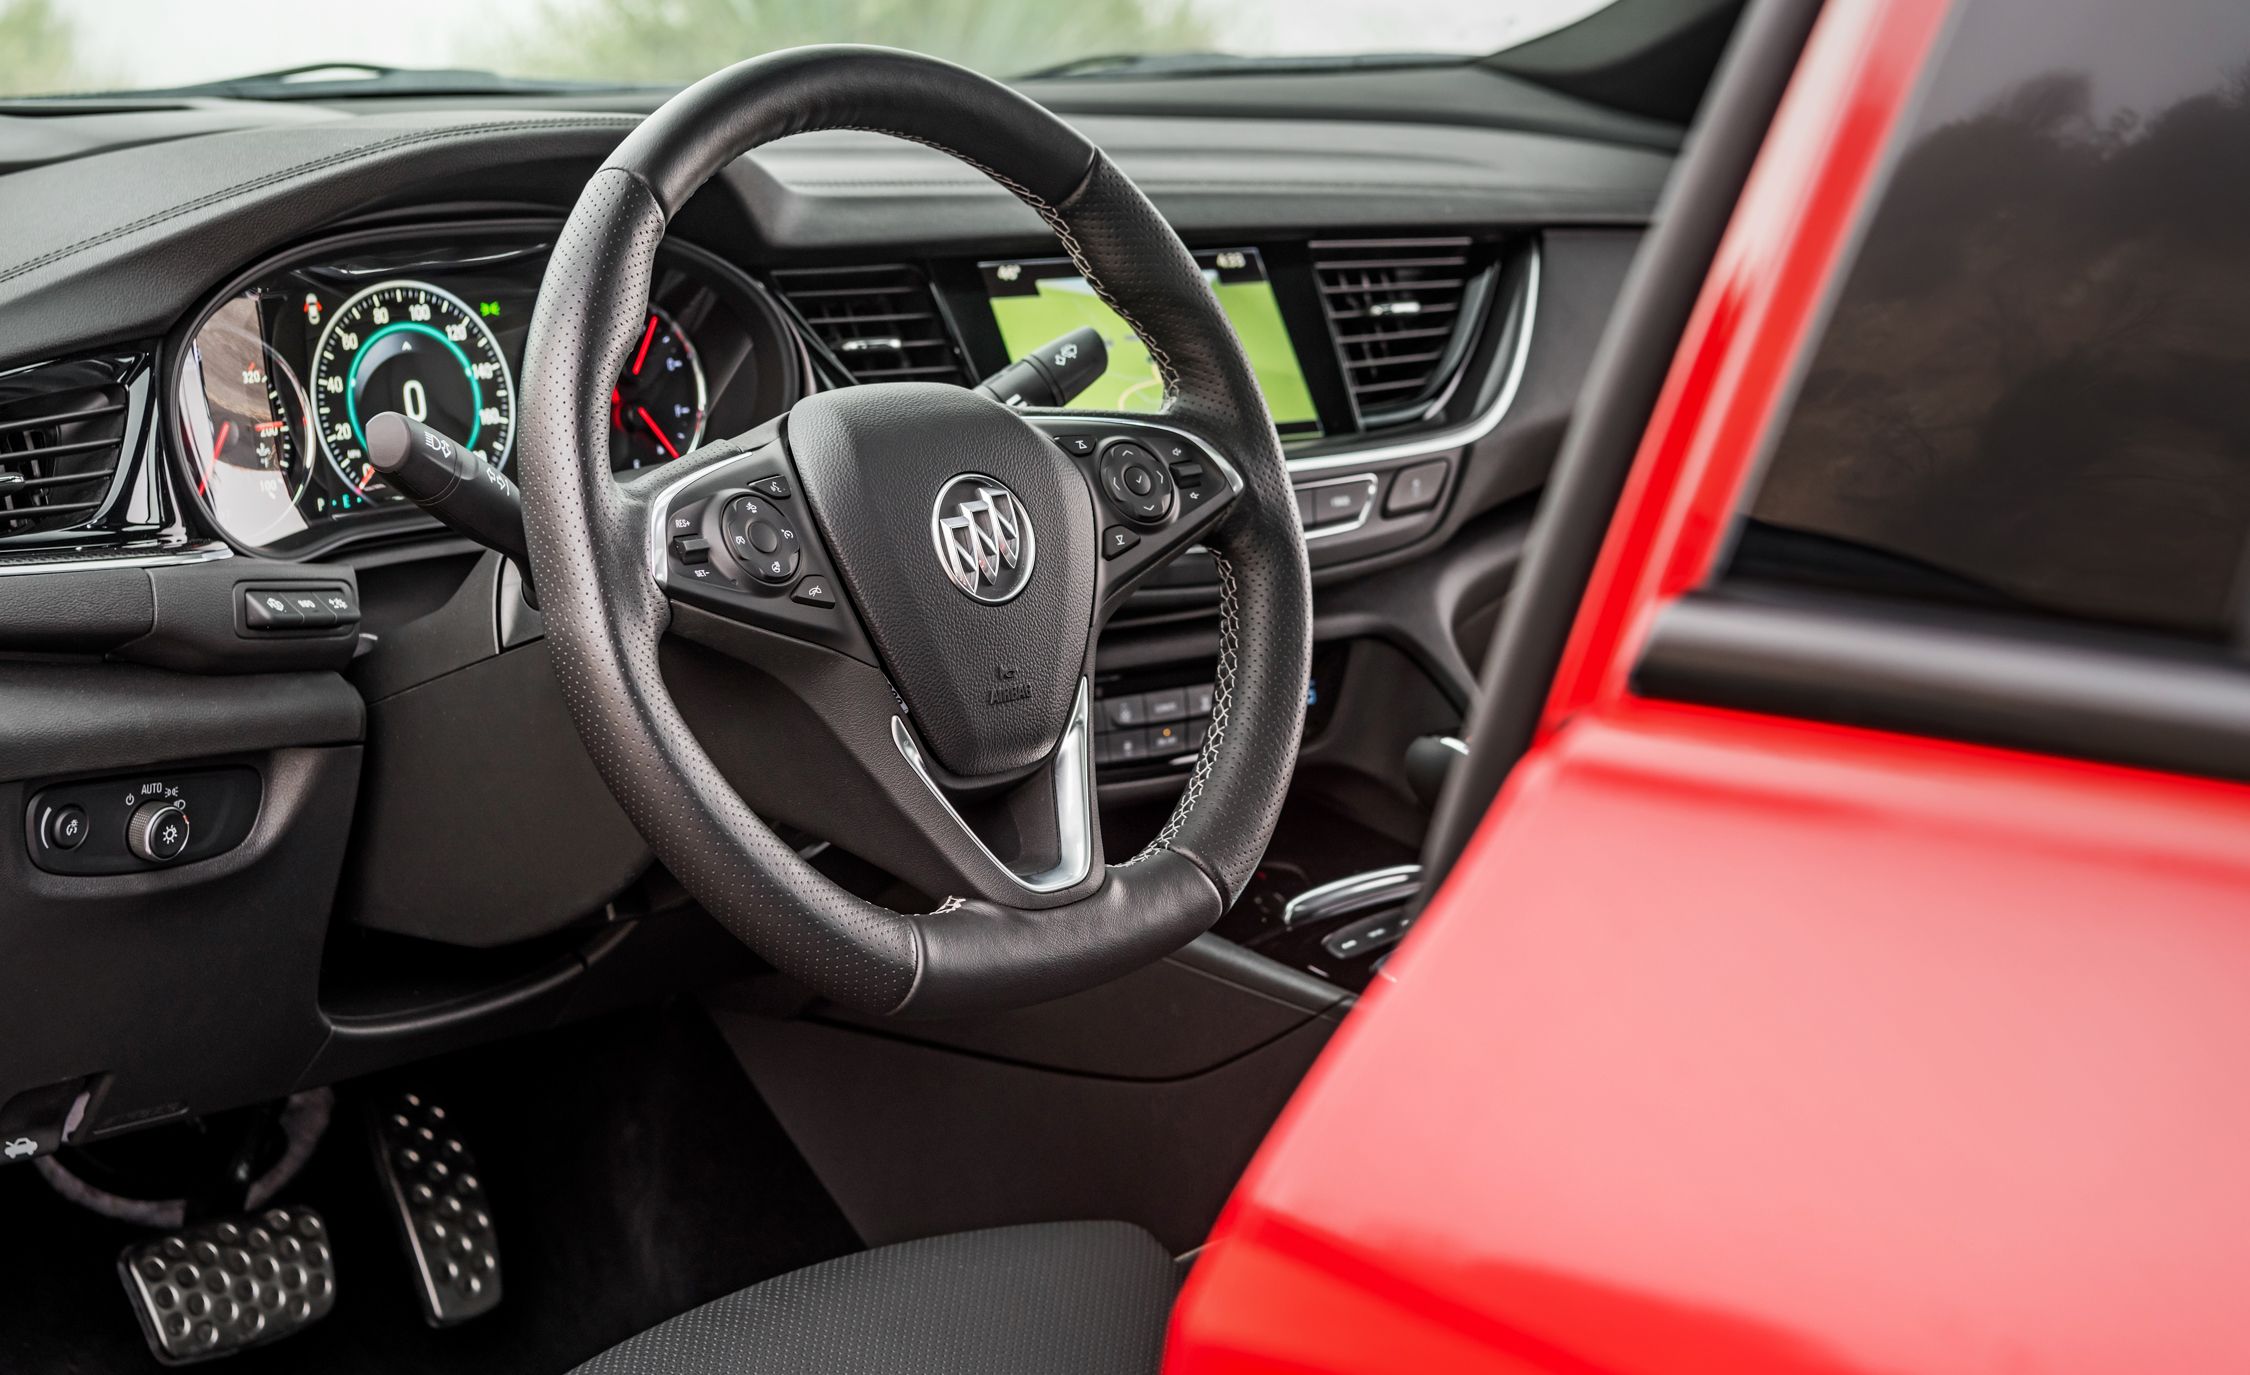 The 2018 Buick Regal GS is a sporty luxury car that has the technology for  safety, comfort